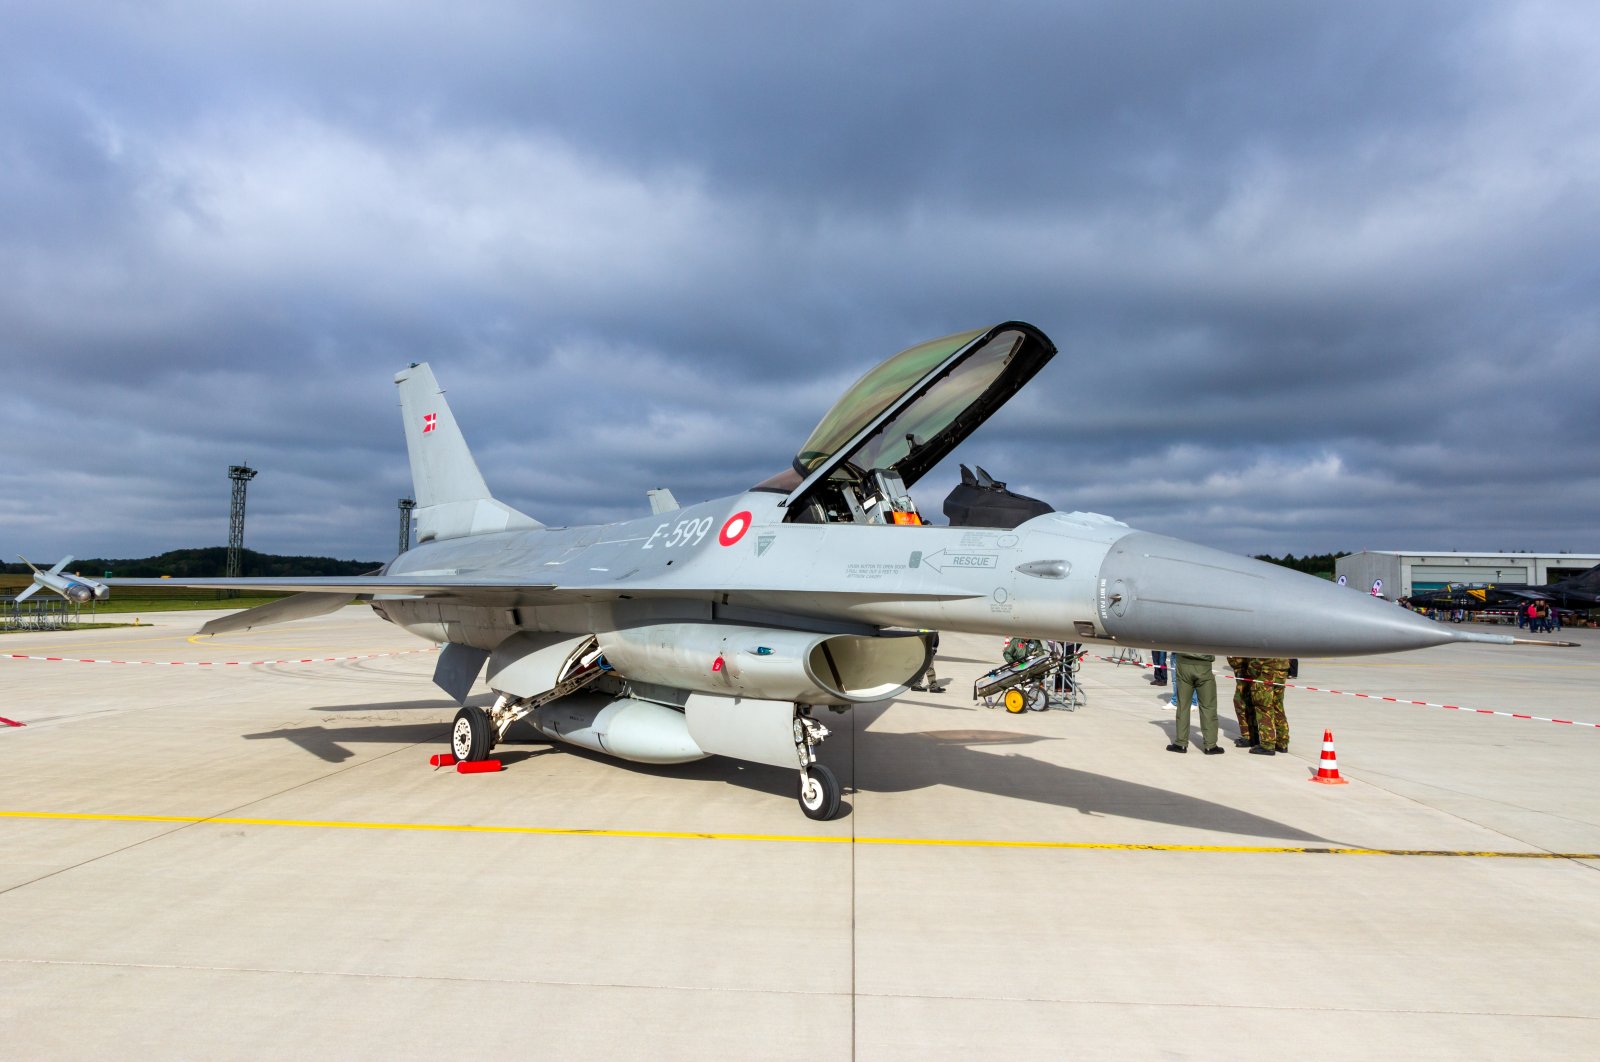 Royal Danish Air Force F-16 fighter jet on the tarmac of Laage Air Base, Germany, Aug. 23, 2014. (Shutterstock Photo)